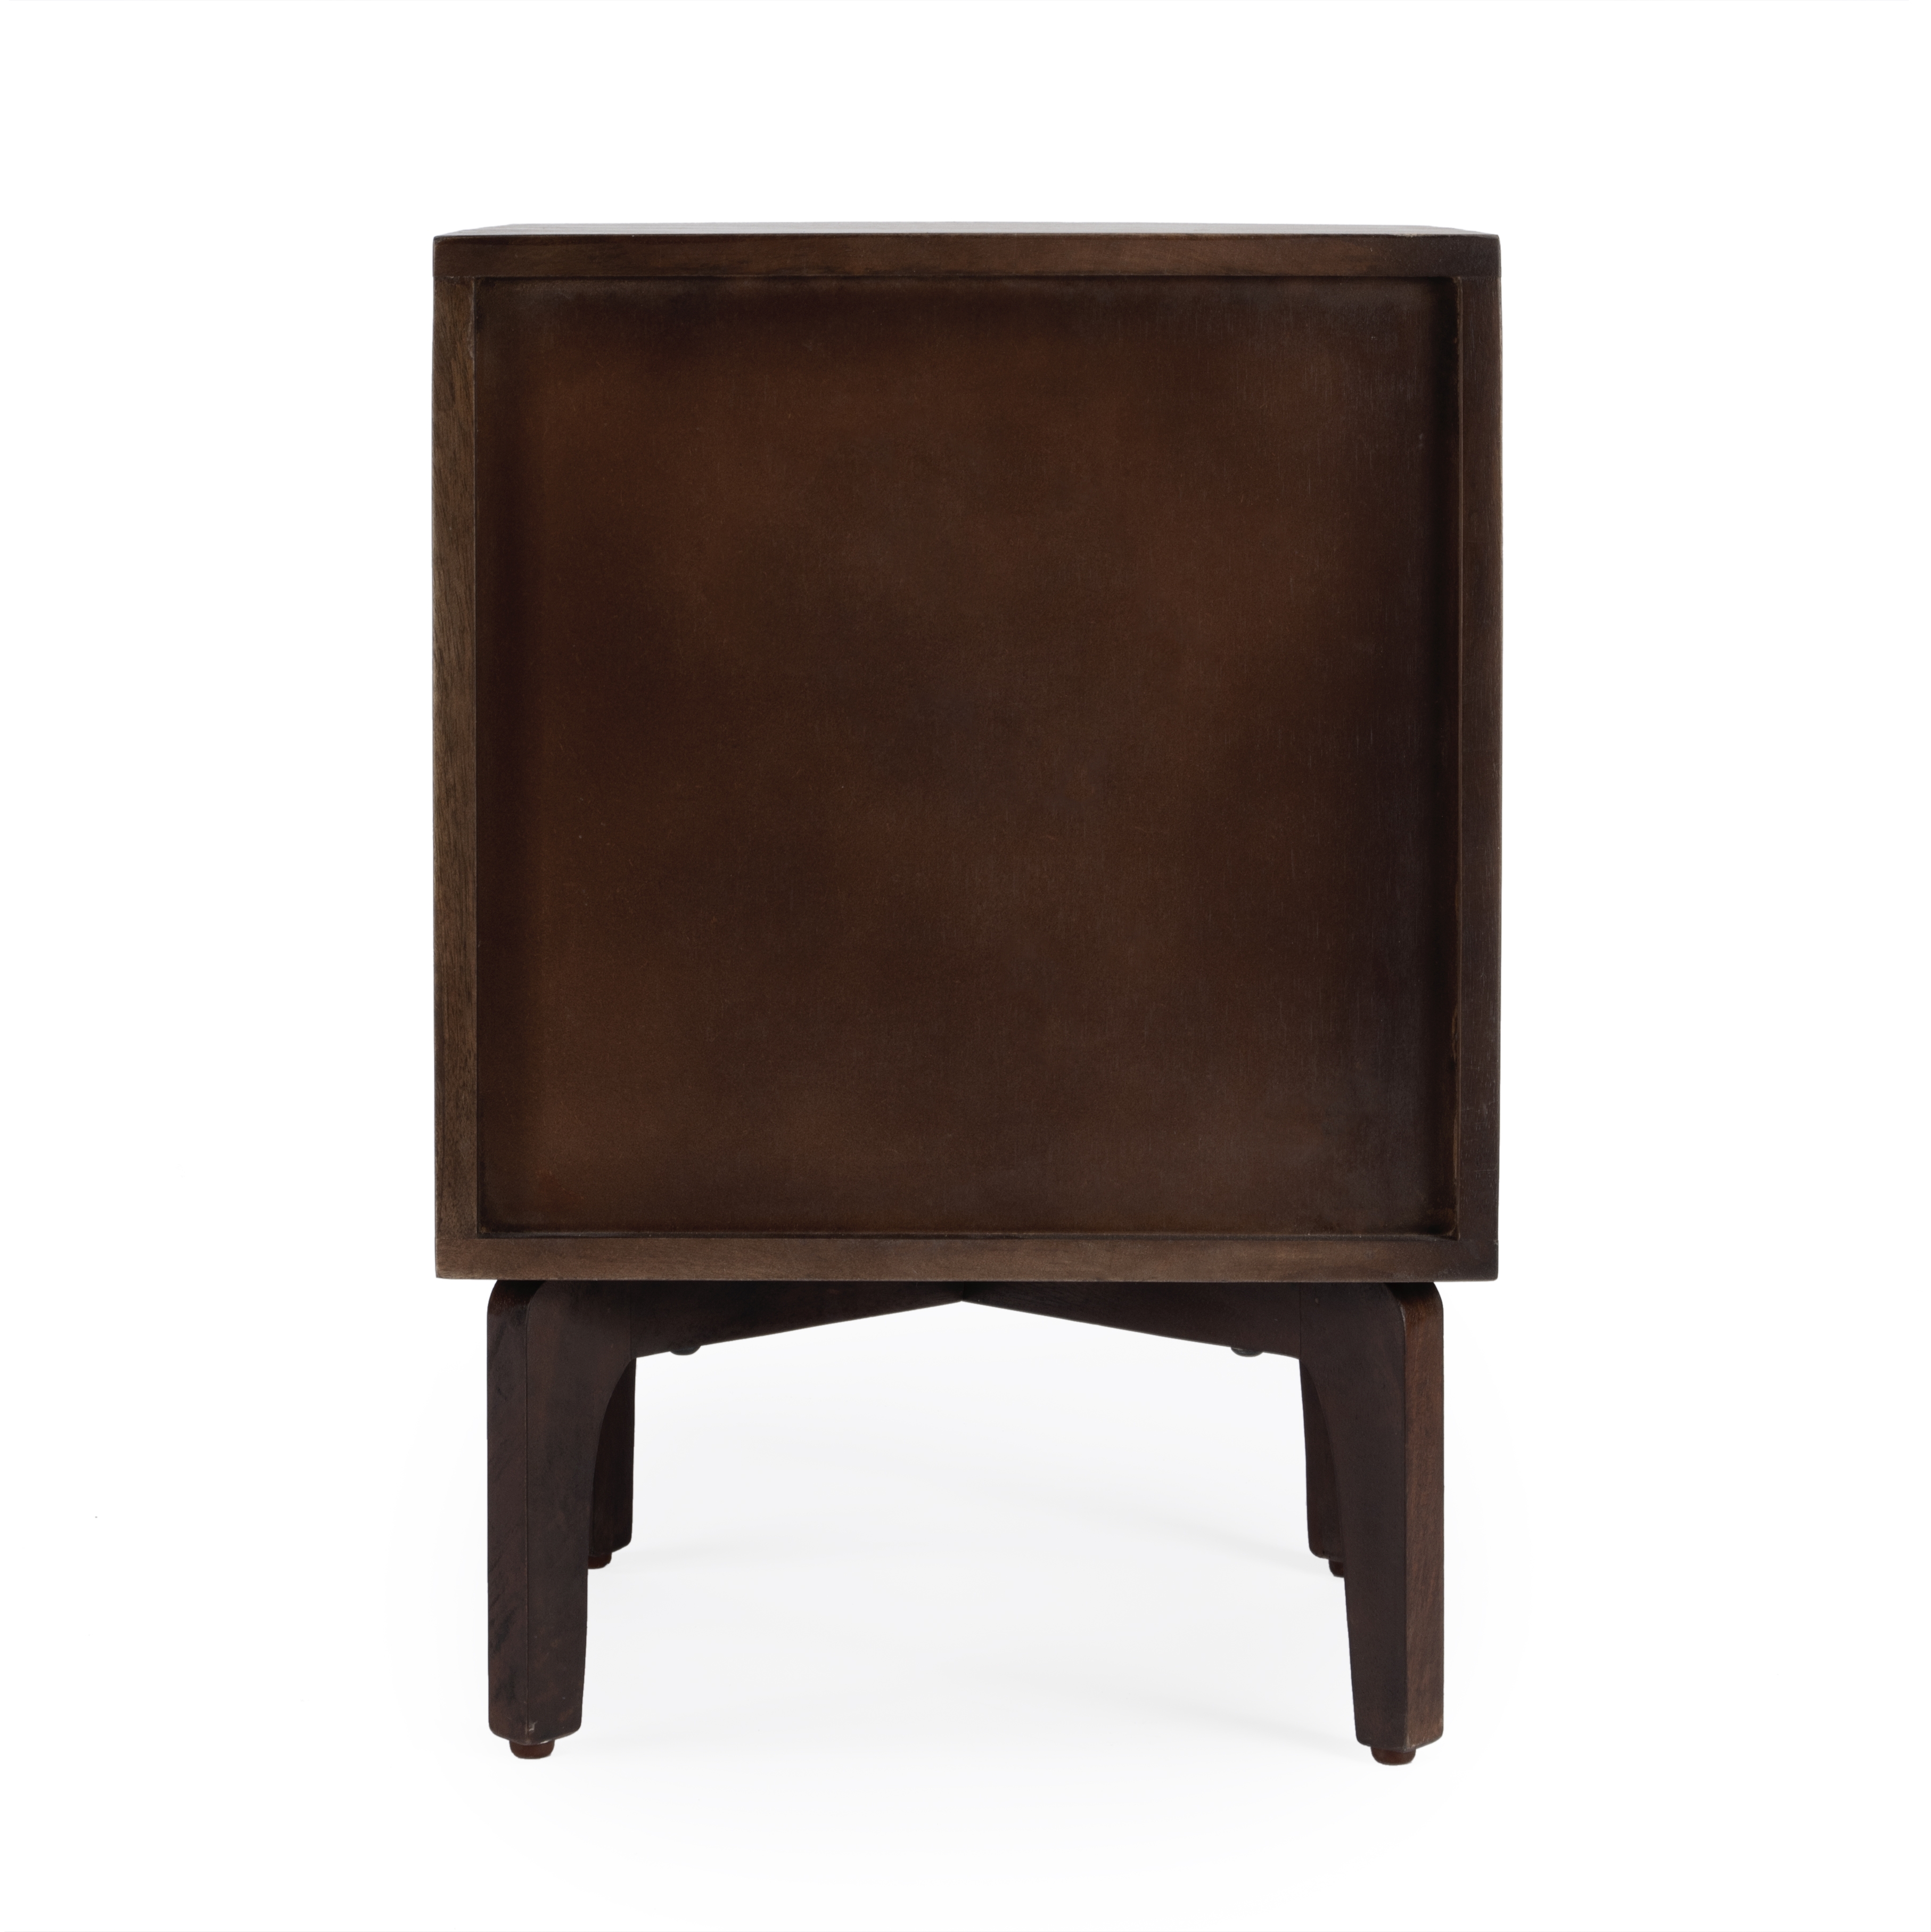 Nuance Brown End Table - Image 2